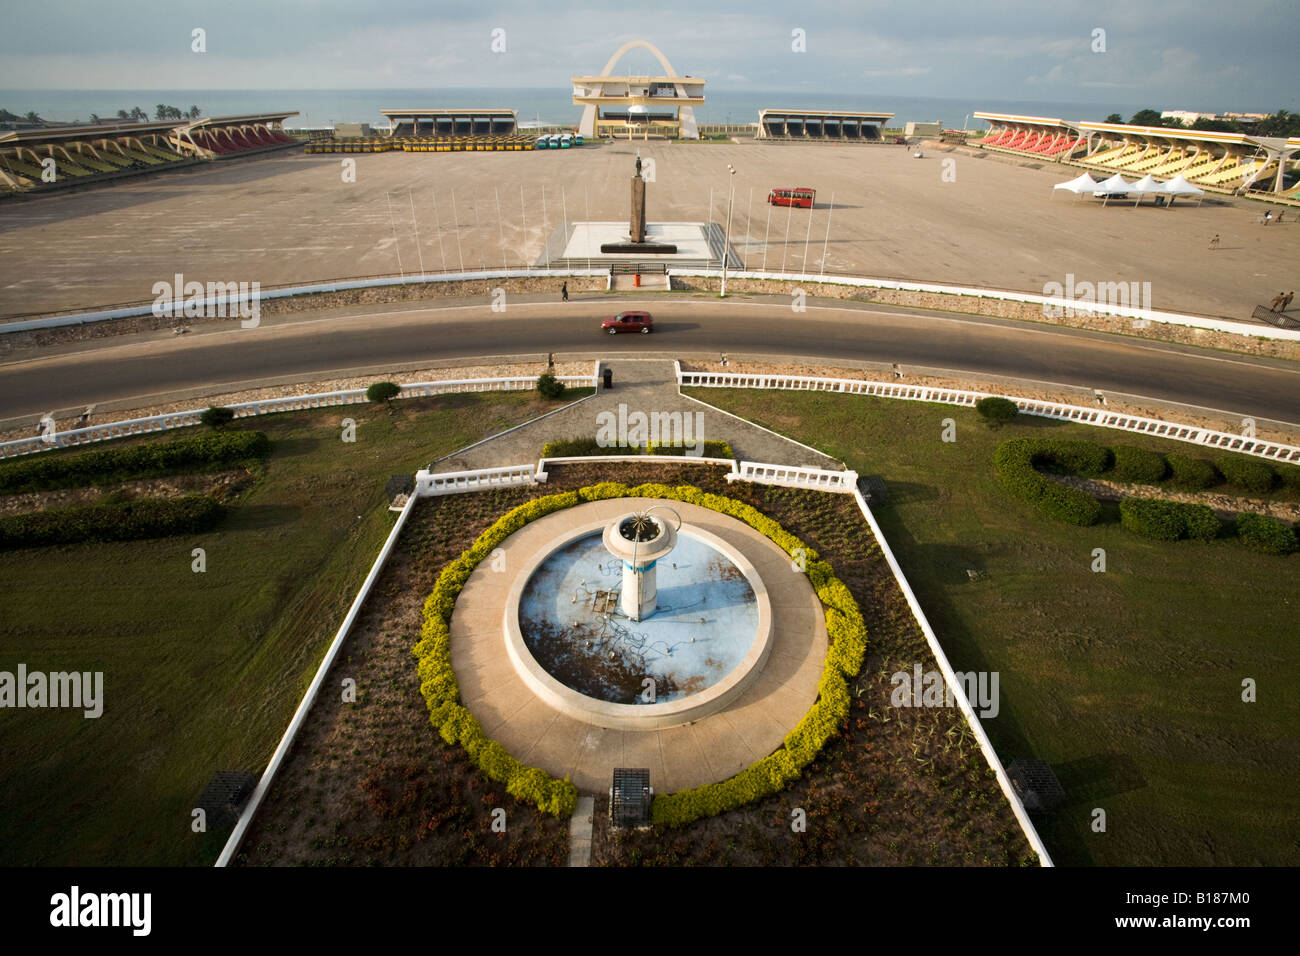 View of Independence square in Accra Ghana Stock Photo